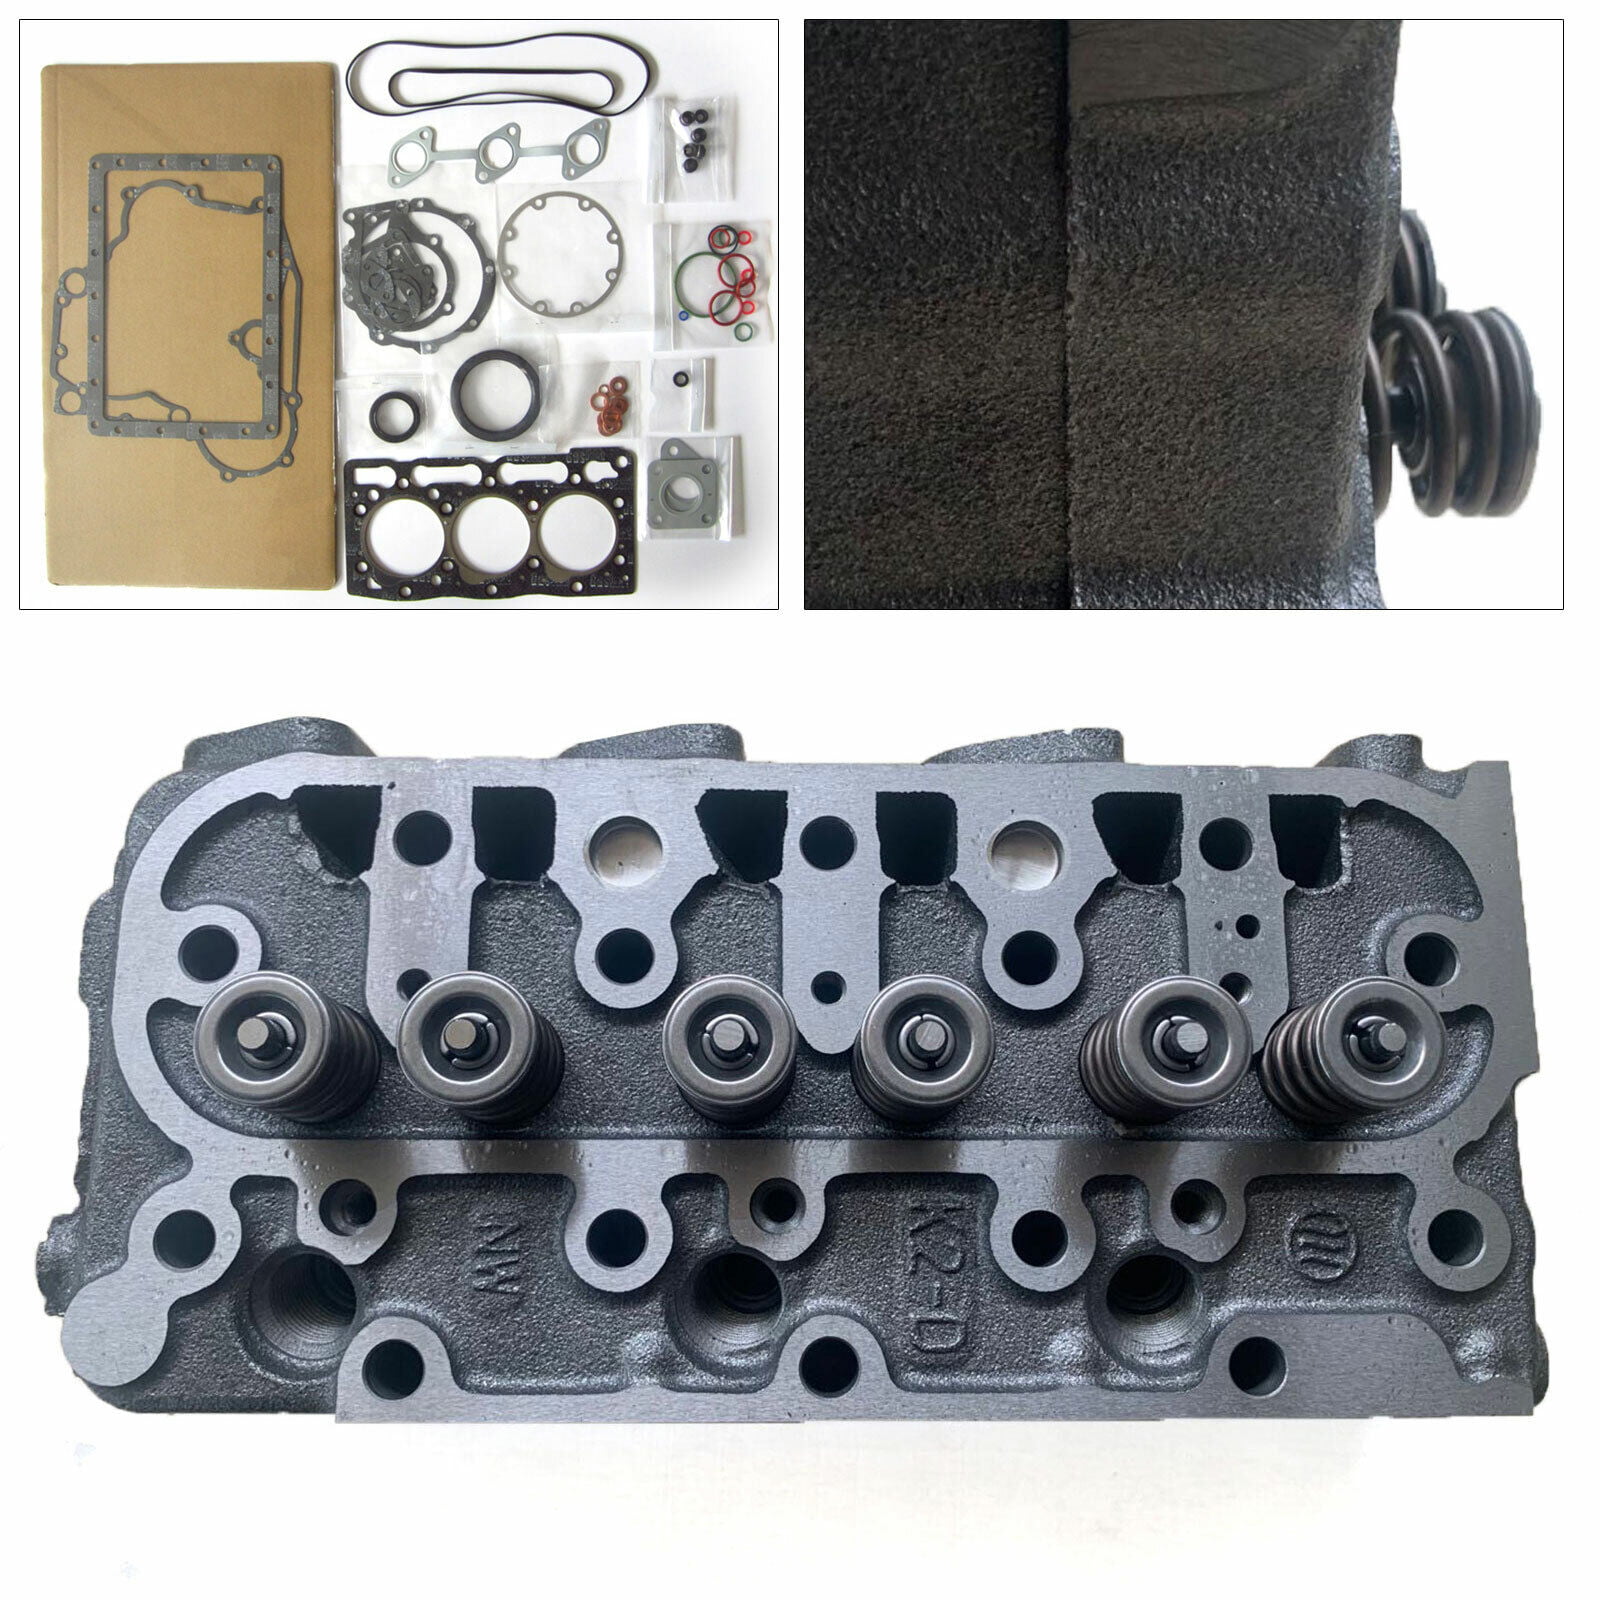 FETCOI For Kubota RTV1100,RTV1100CW9 RTV1140CPX D1105 Complete Cylinder  Head Gasket